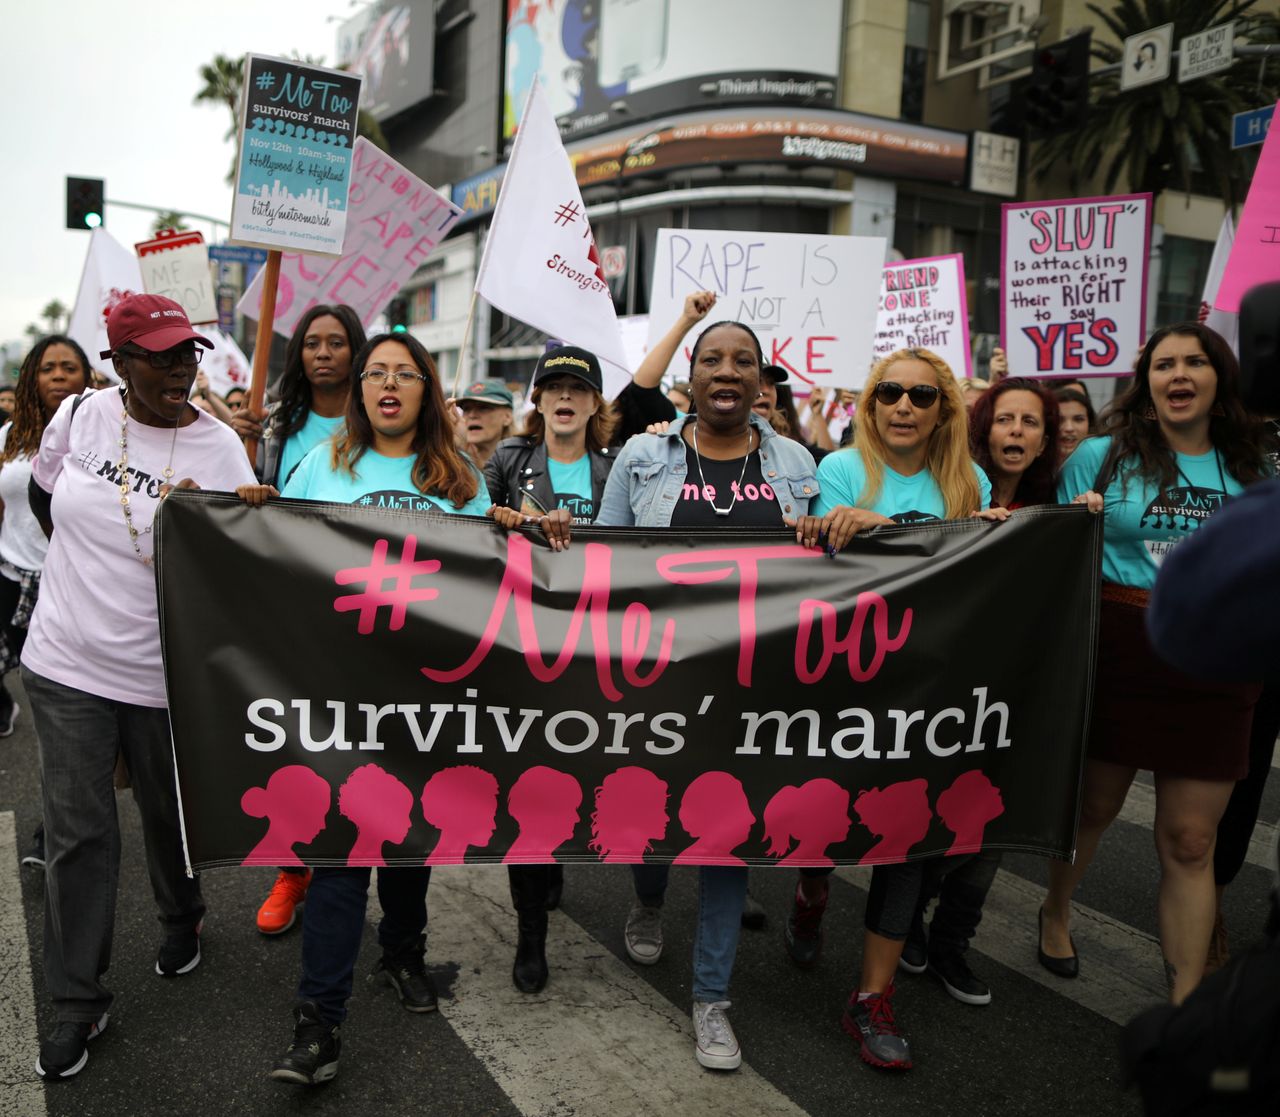 People participate in a march for survivors of sexual assault in Los Angeles, California, on Nov. 12, 2017.